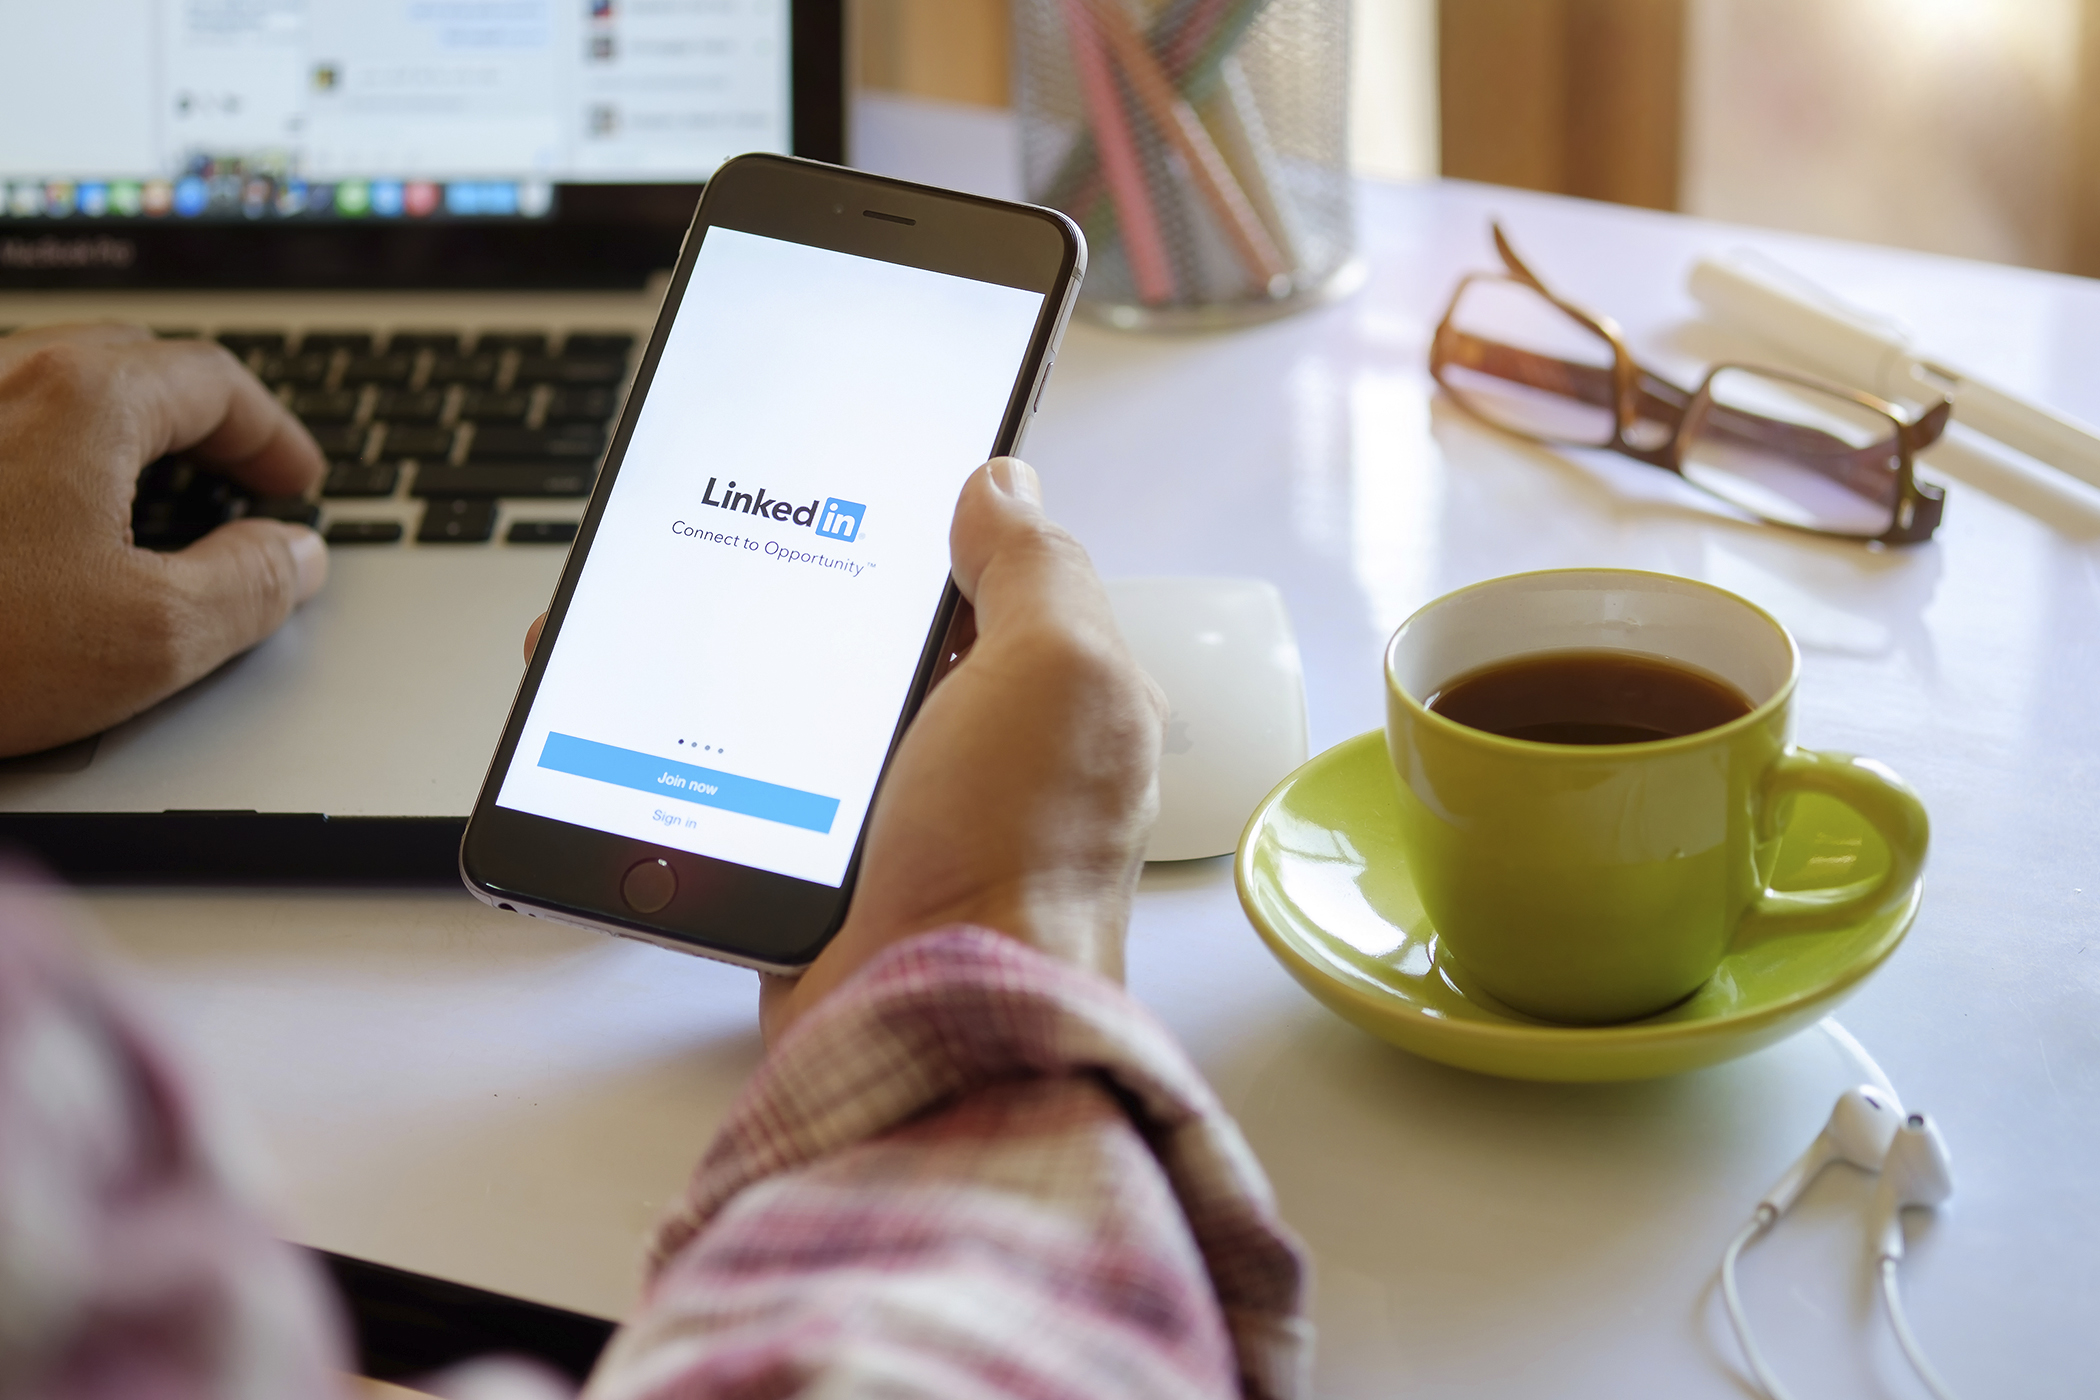 iPhone 6 Plus with LinkedIn on the screen (Shutterstock)